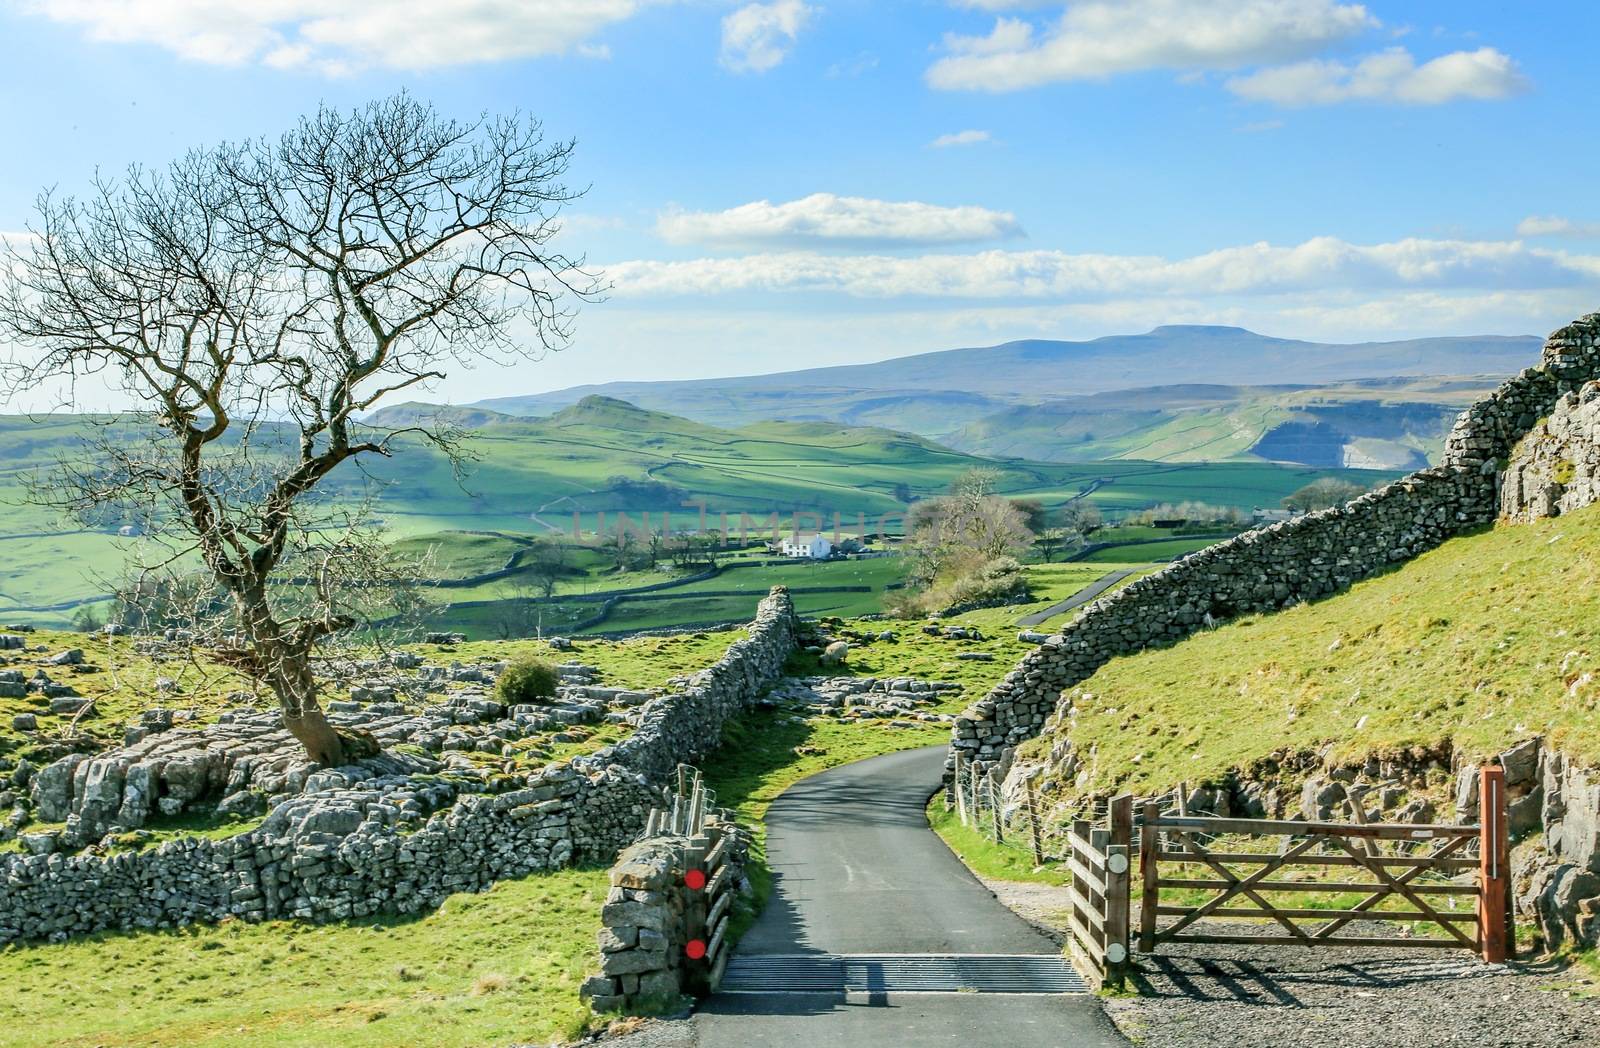 Beautiful yorkshire dales landscape stunning scenery england tourism uk green rolling hills road